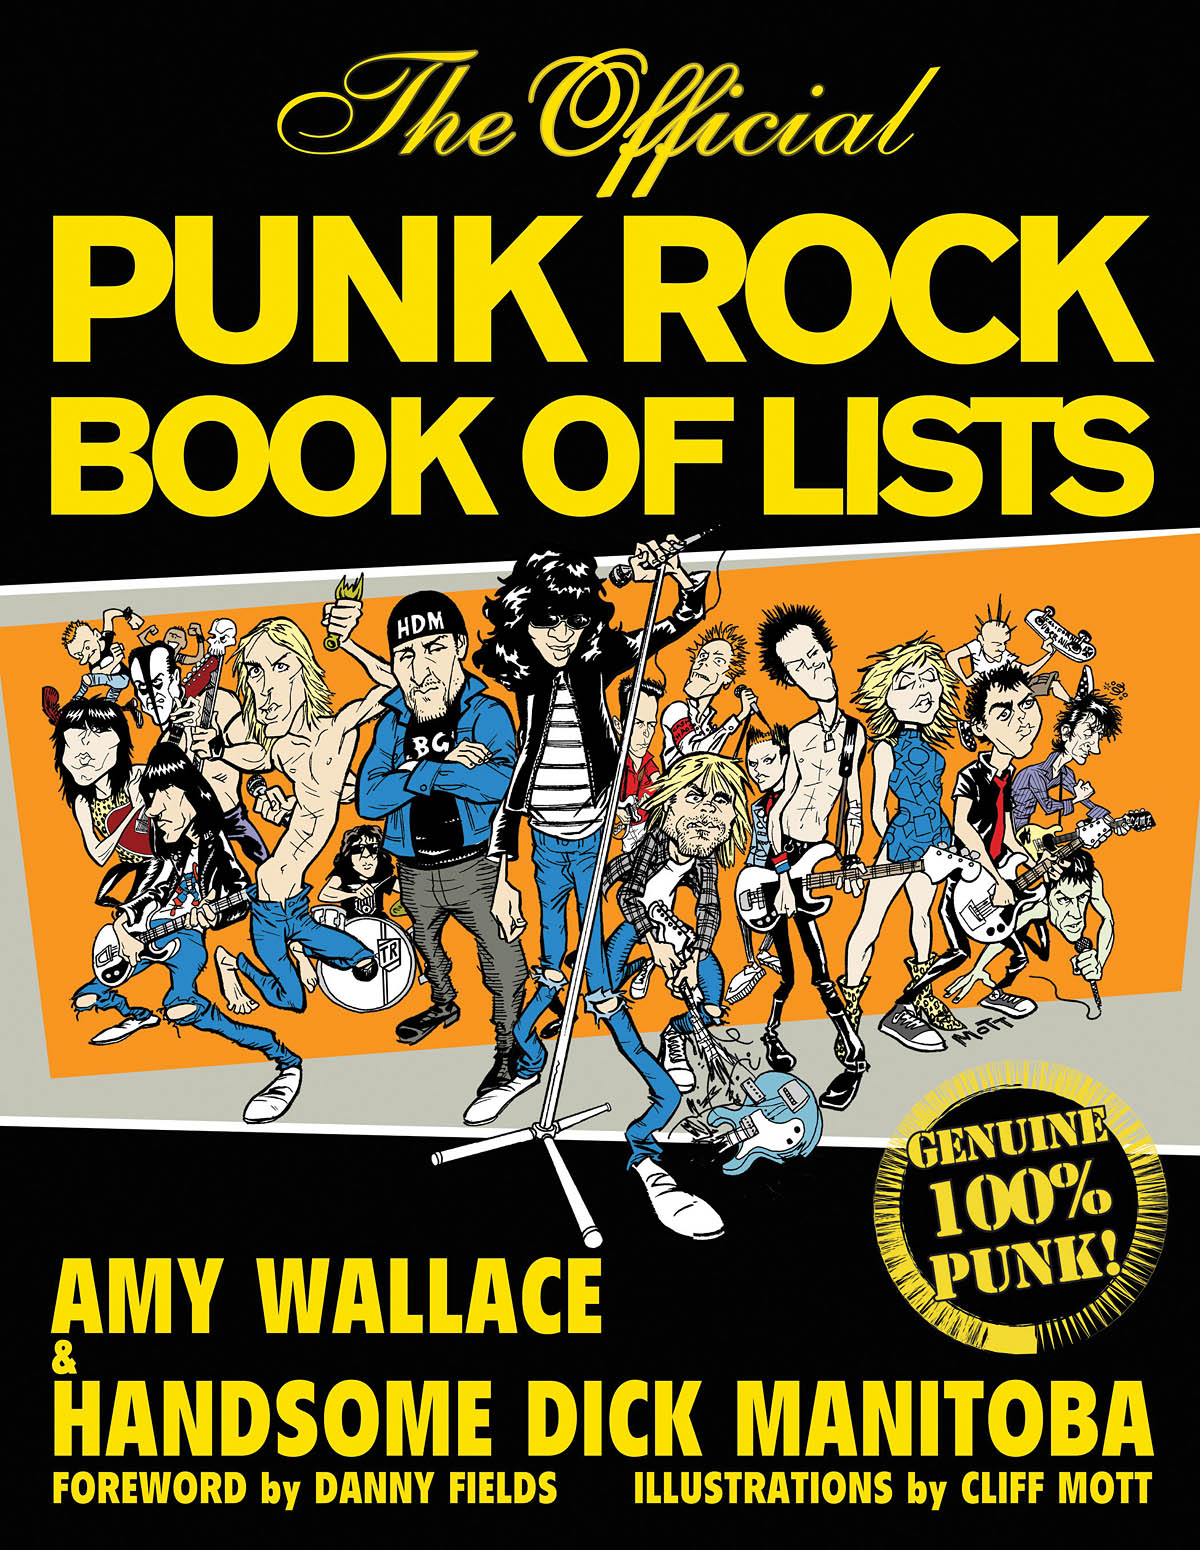 The Official Punk Rock Book Of Lists: Reference Books